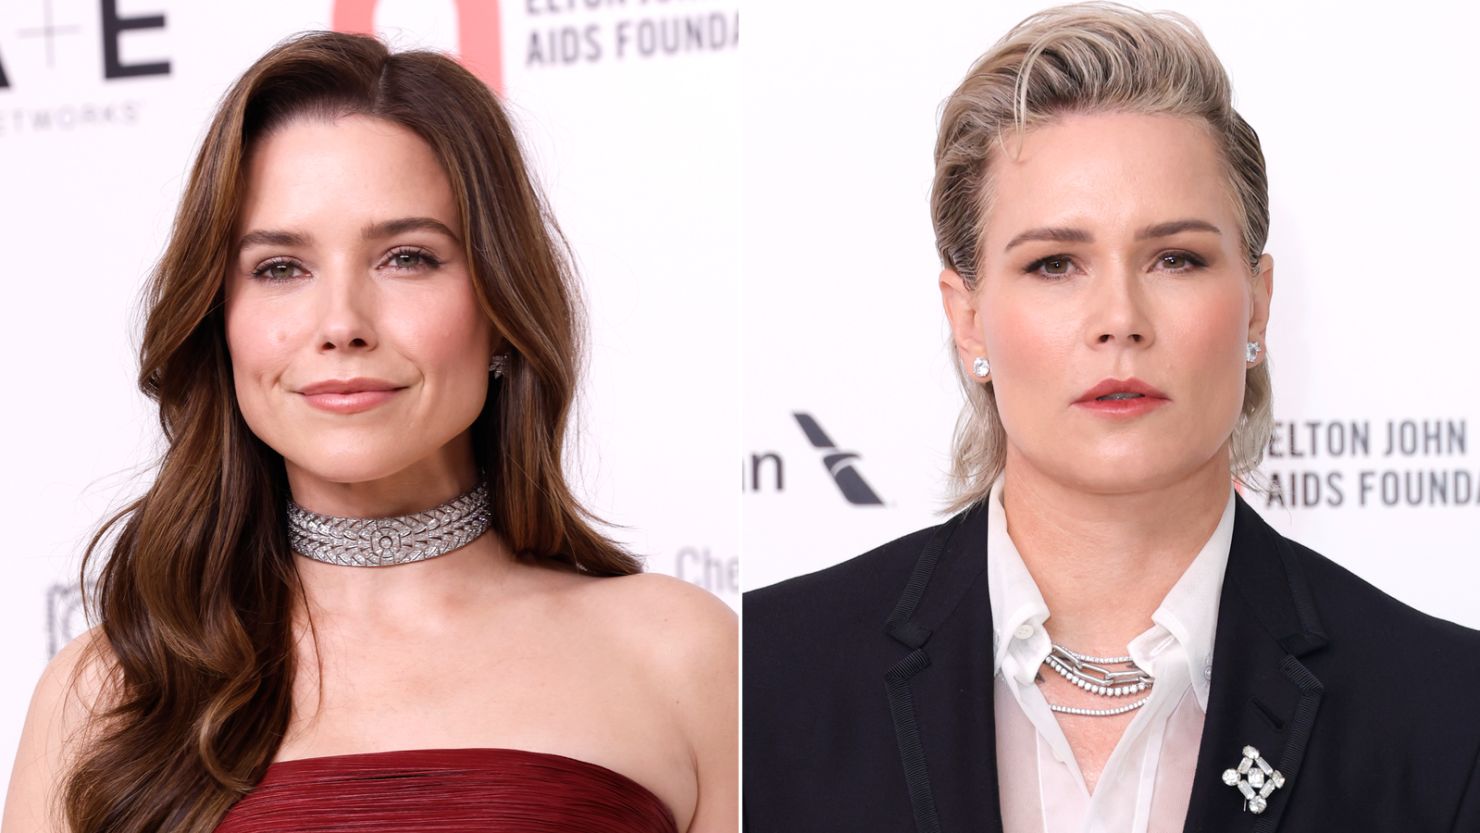 Sophia Bush (left) has come out as queer and in a relationship with retired soccer player Ashlyn Harris.